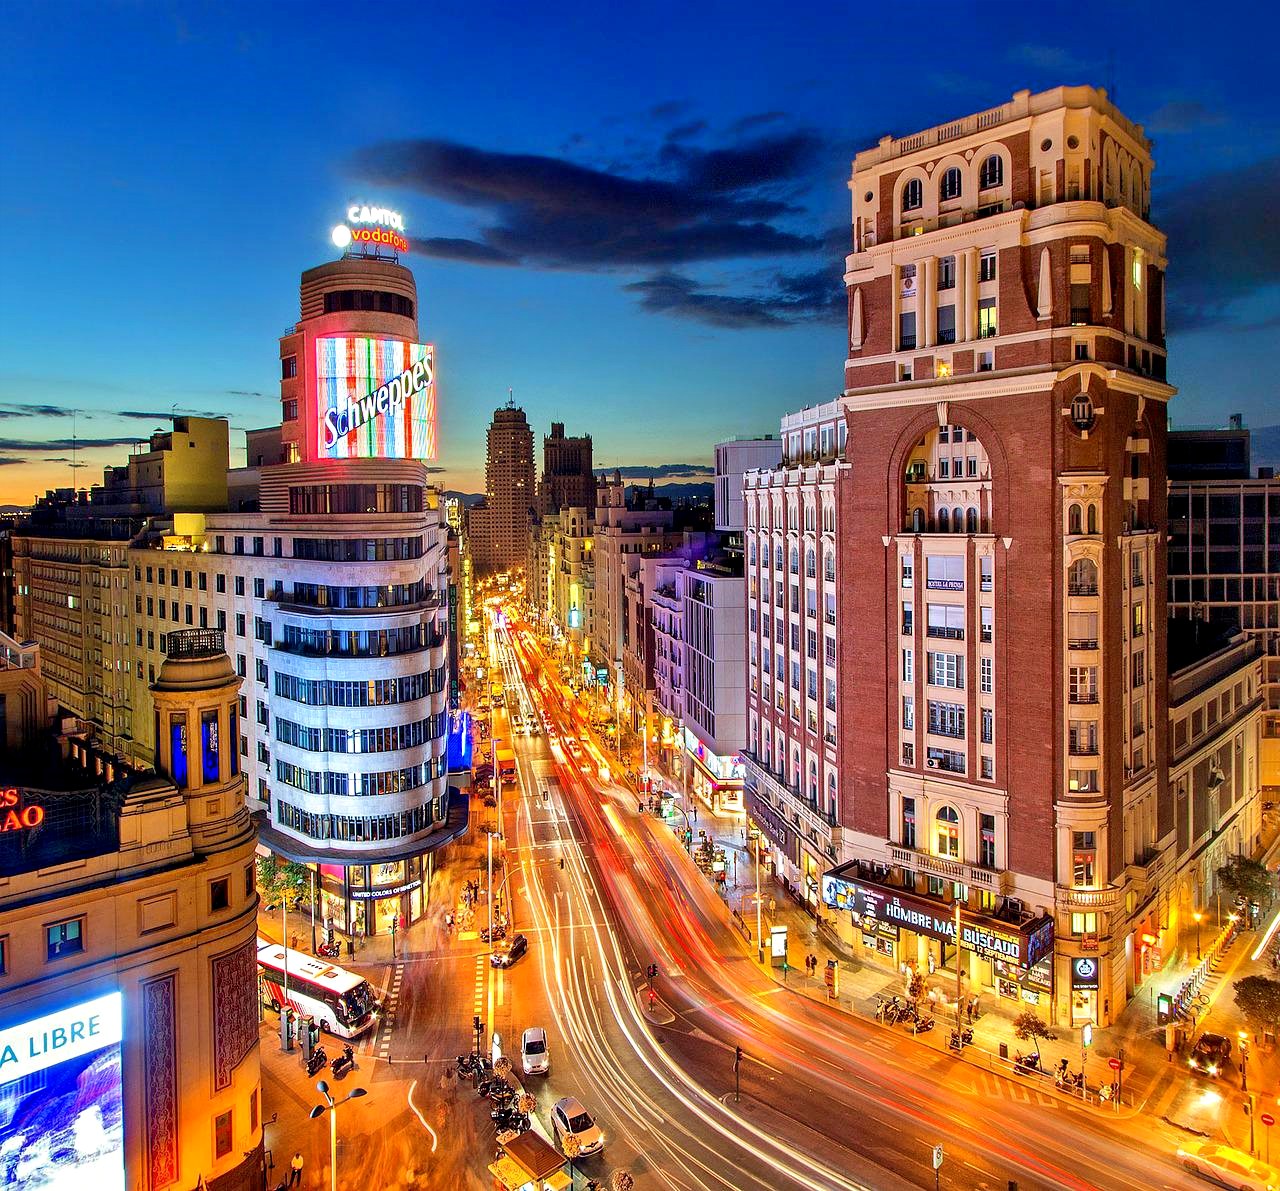 Madrid - Spain 2nd most-visited country according to UNTWO